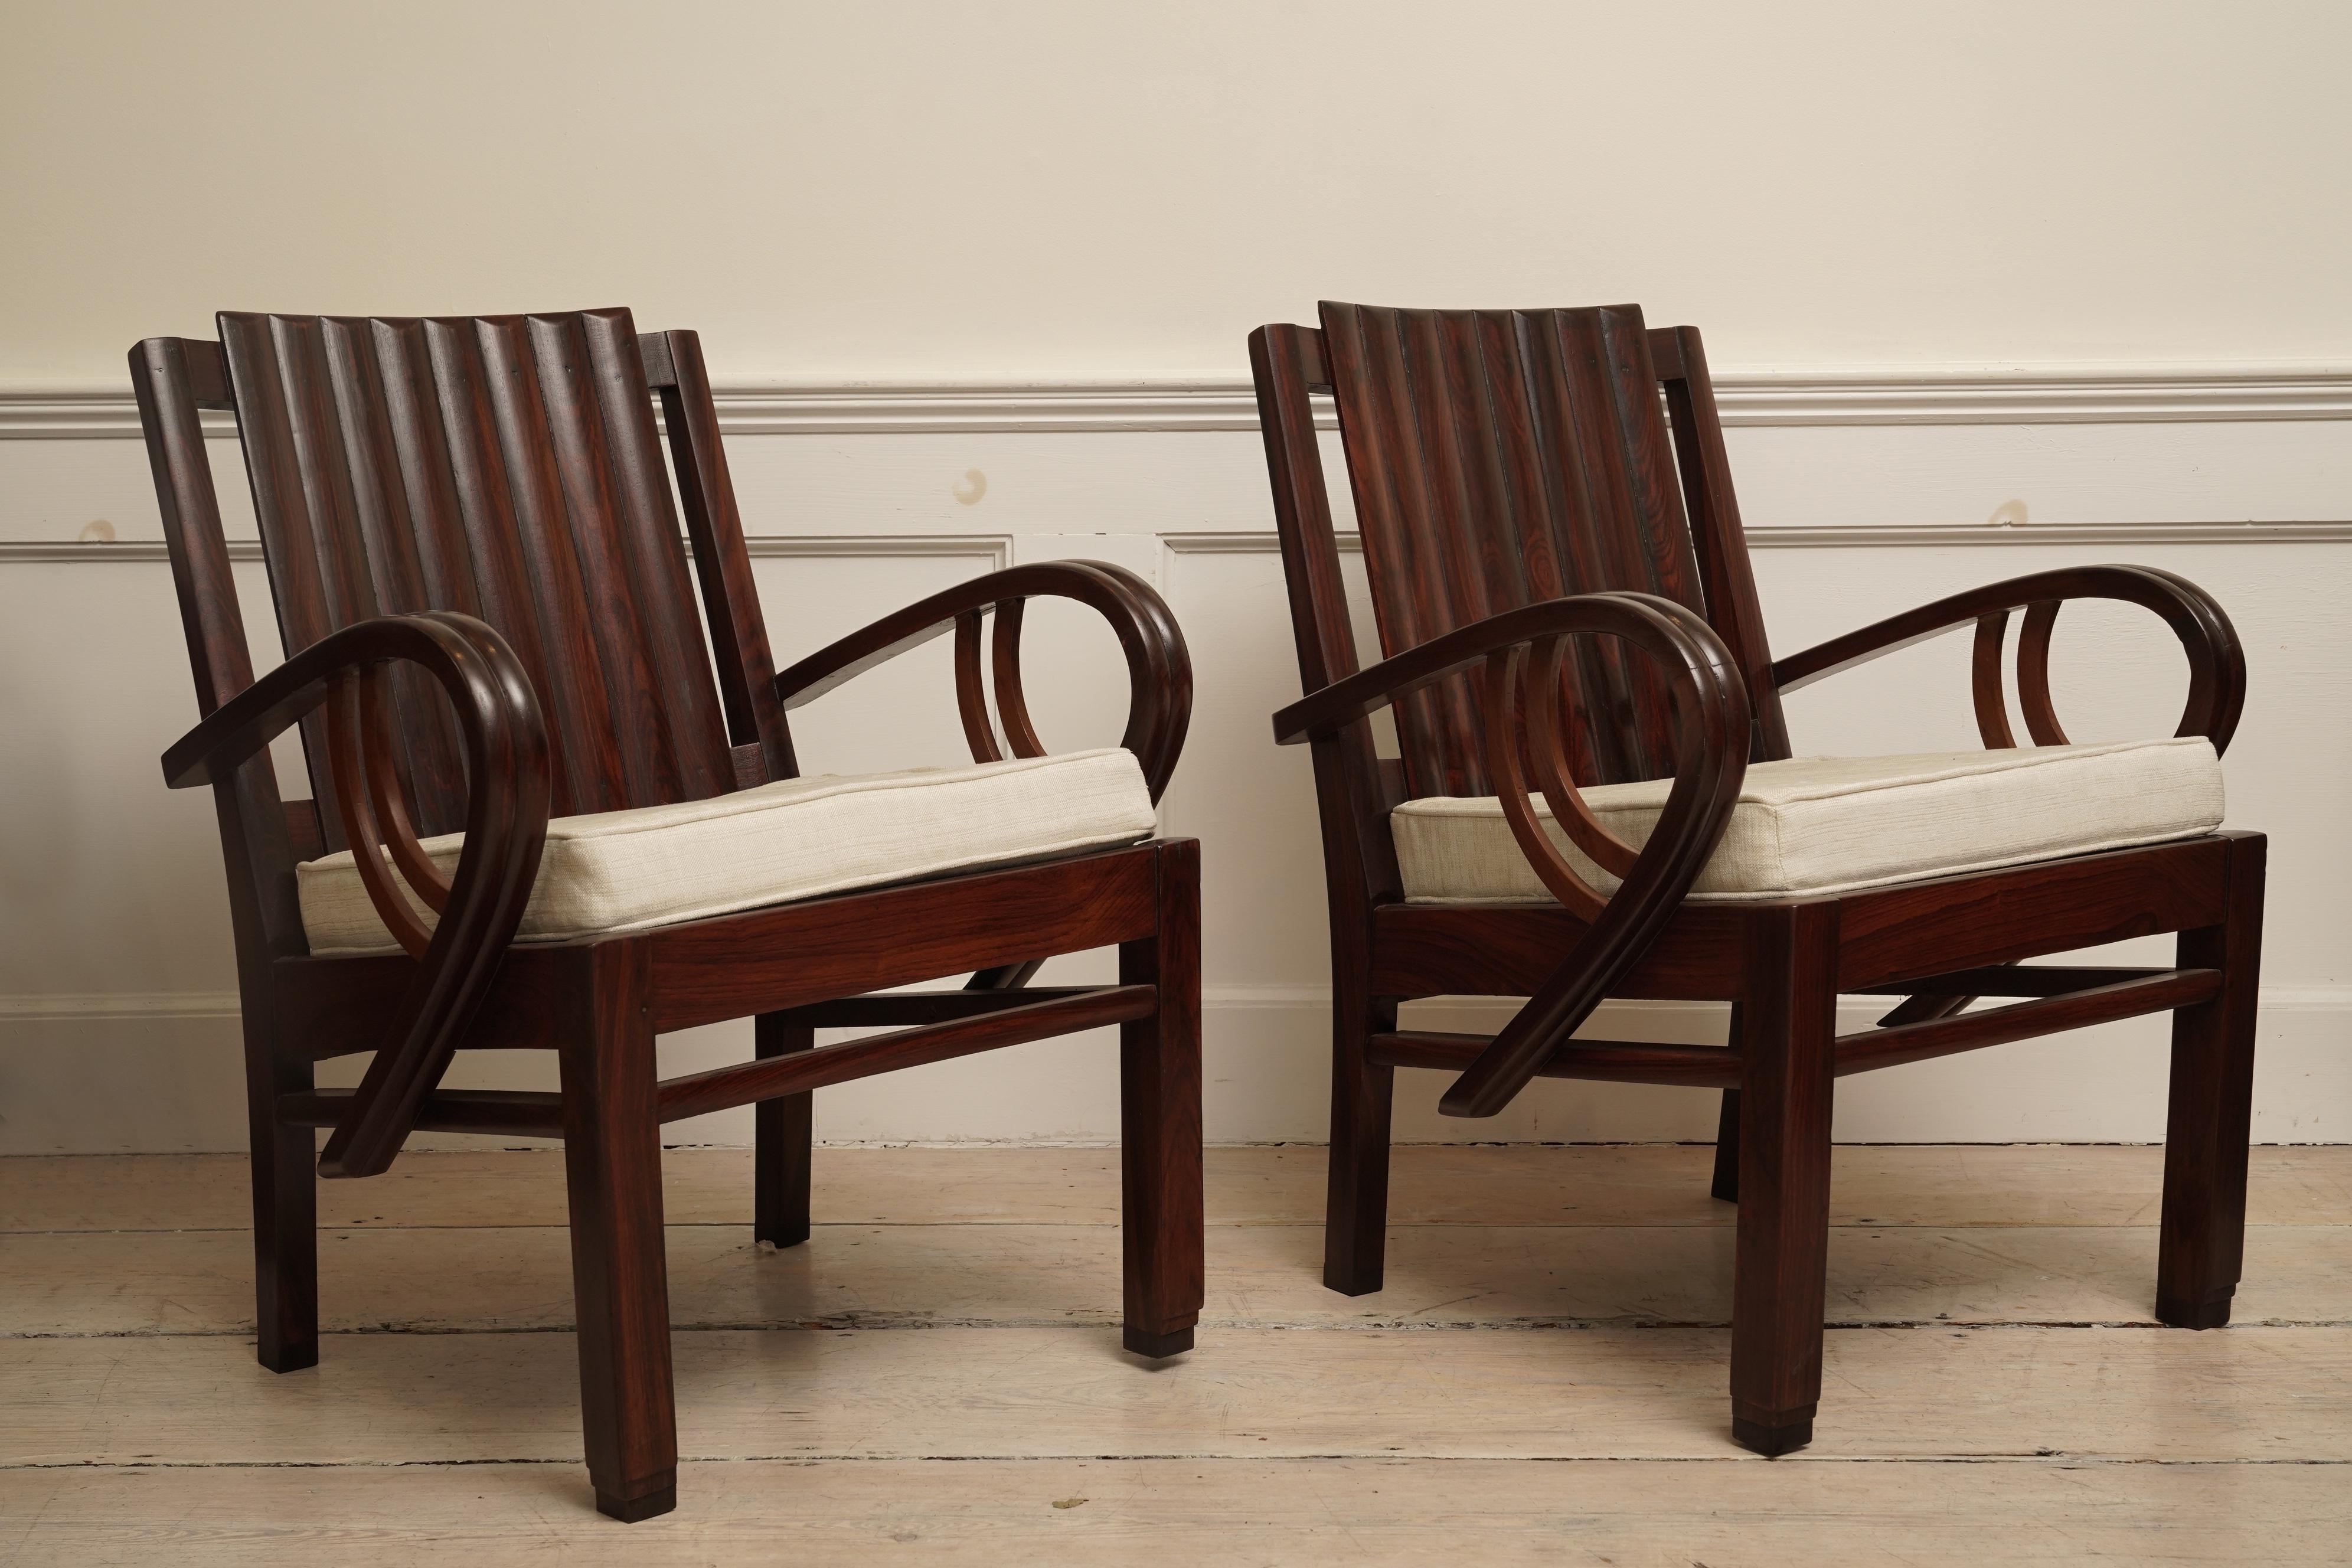 An incredible Art Deco rosewood suite of three pieces loveseat and pair of chairs. Slatted back with curled arms and stepped feet. The loveseat is 51